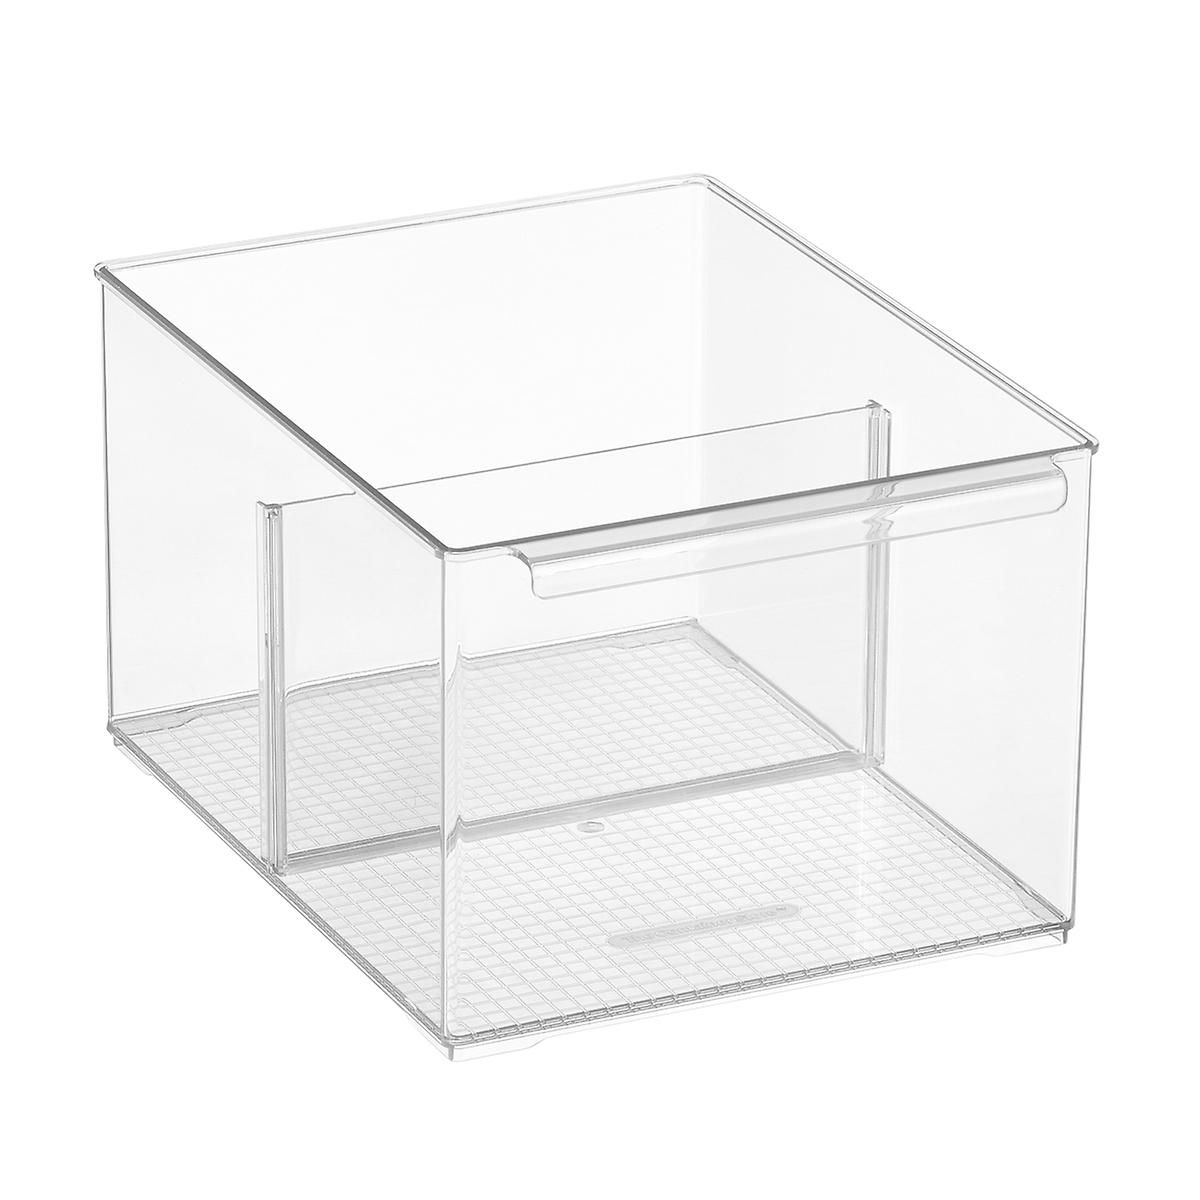 Everything Organizer Medium Cabinet Depth Pantry Bin w/ Divider ClearSKU:100871635.07 Reviews | The Container Store